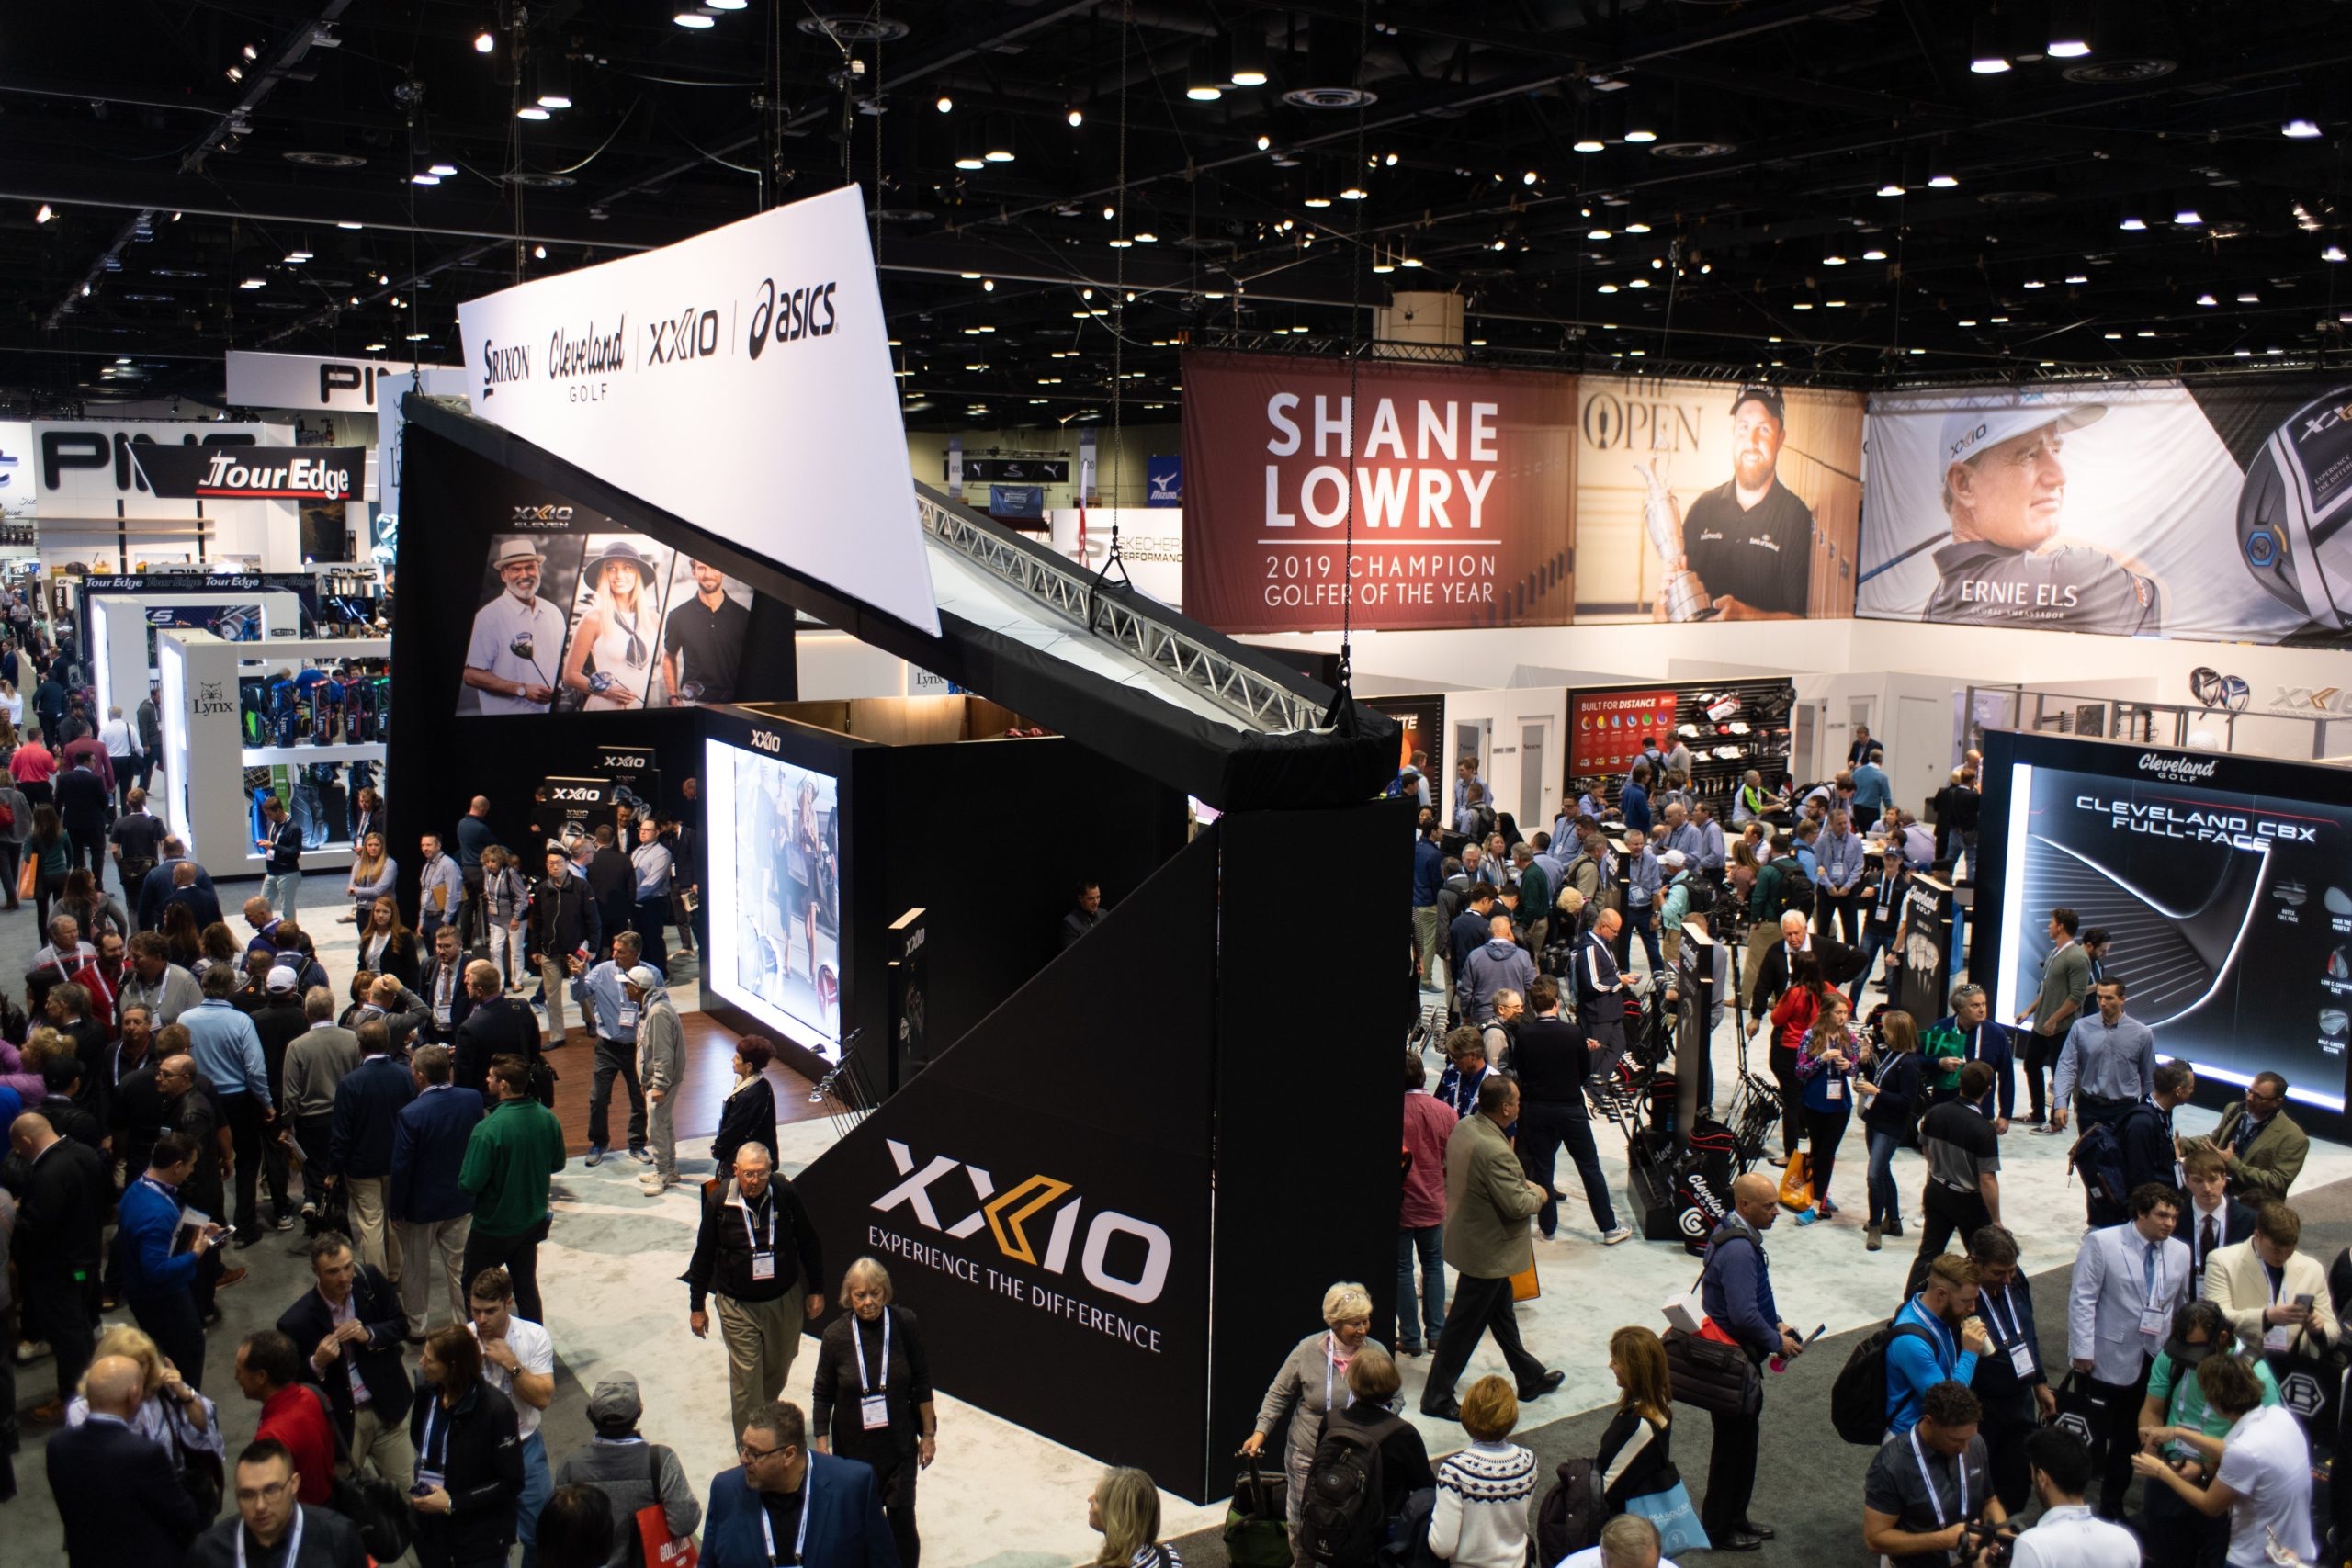 The PGA Show’s exhibition halls hosted over 40,000 visitors over three days